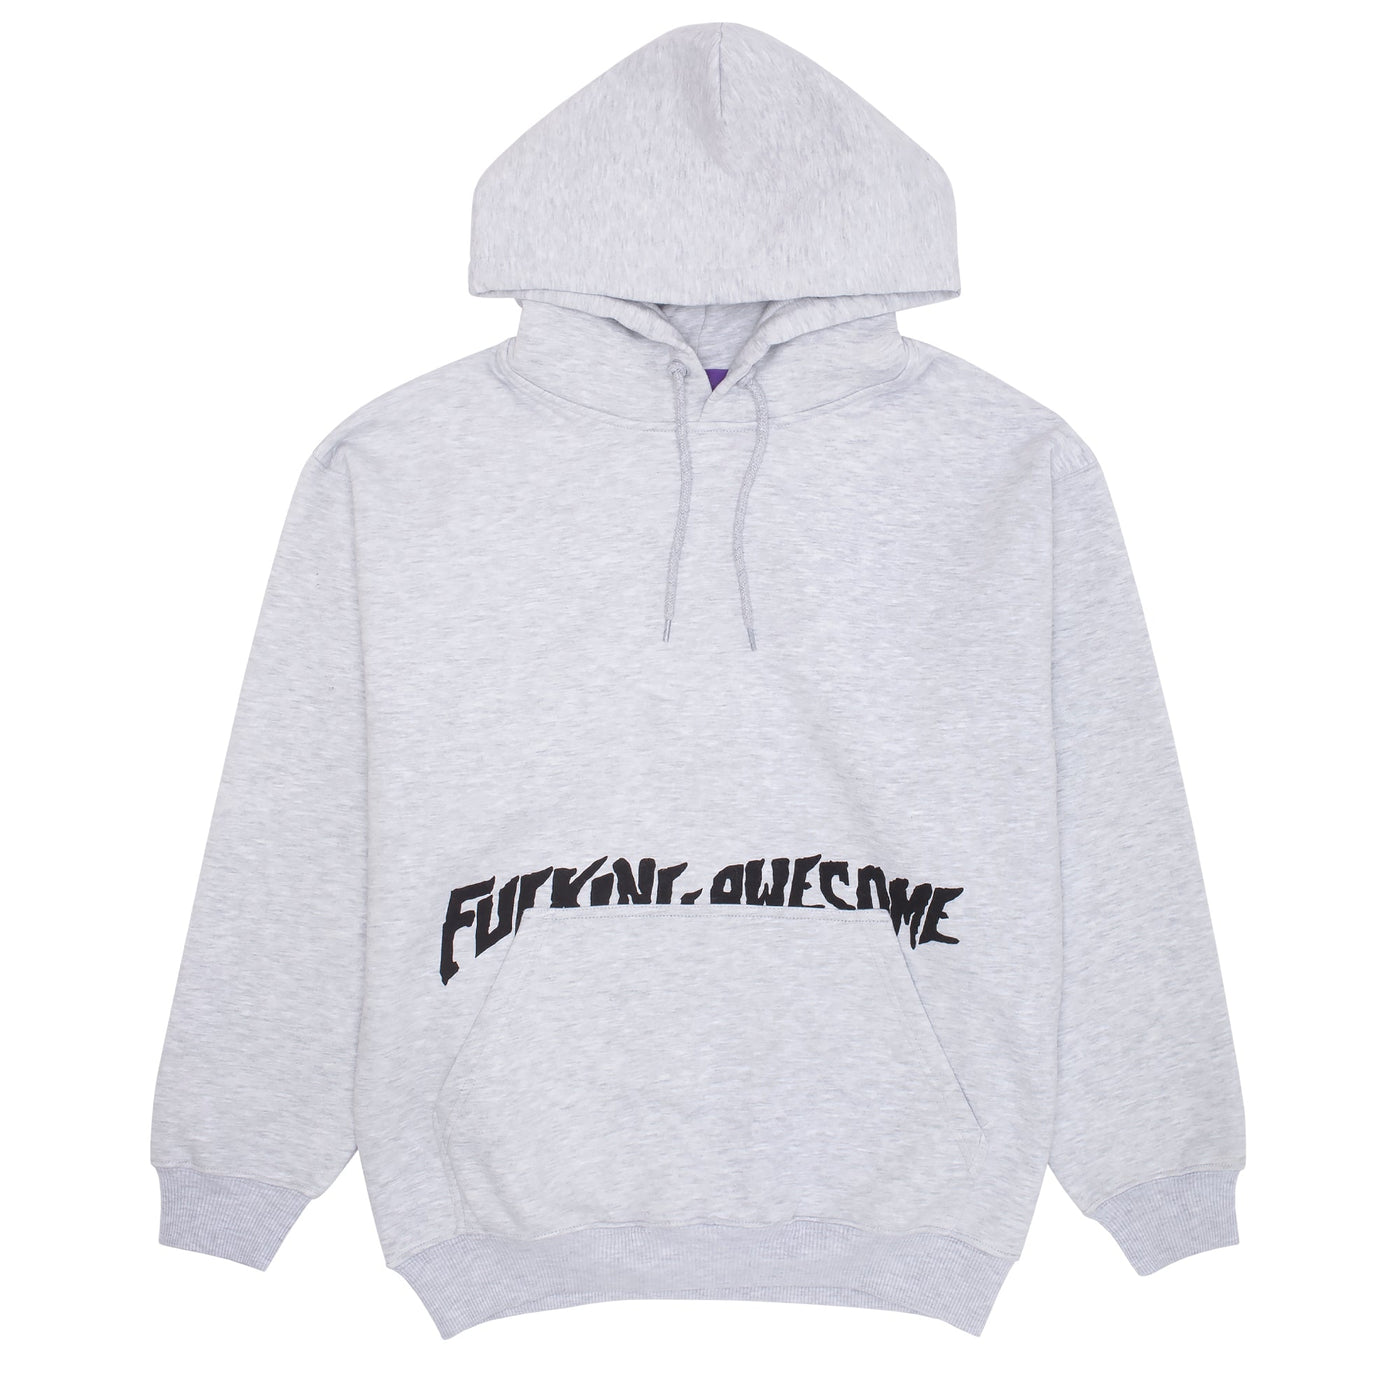 Cut Off Hoodie – Fucking Awesome Japan